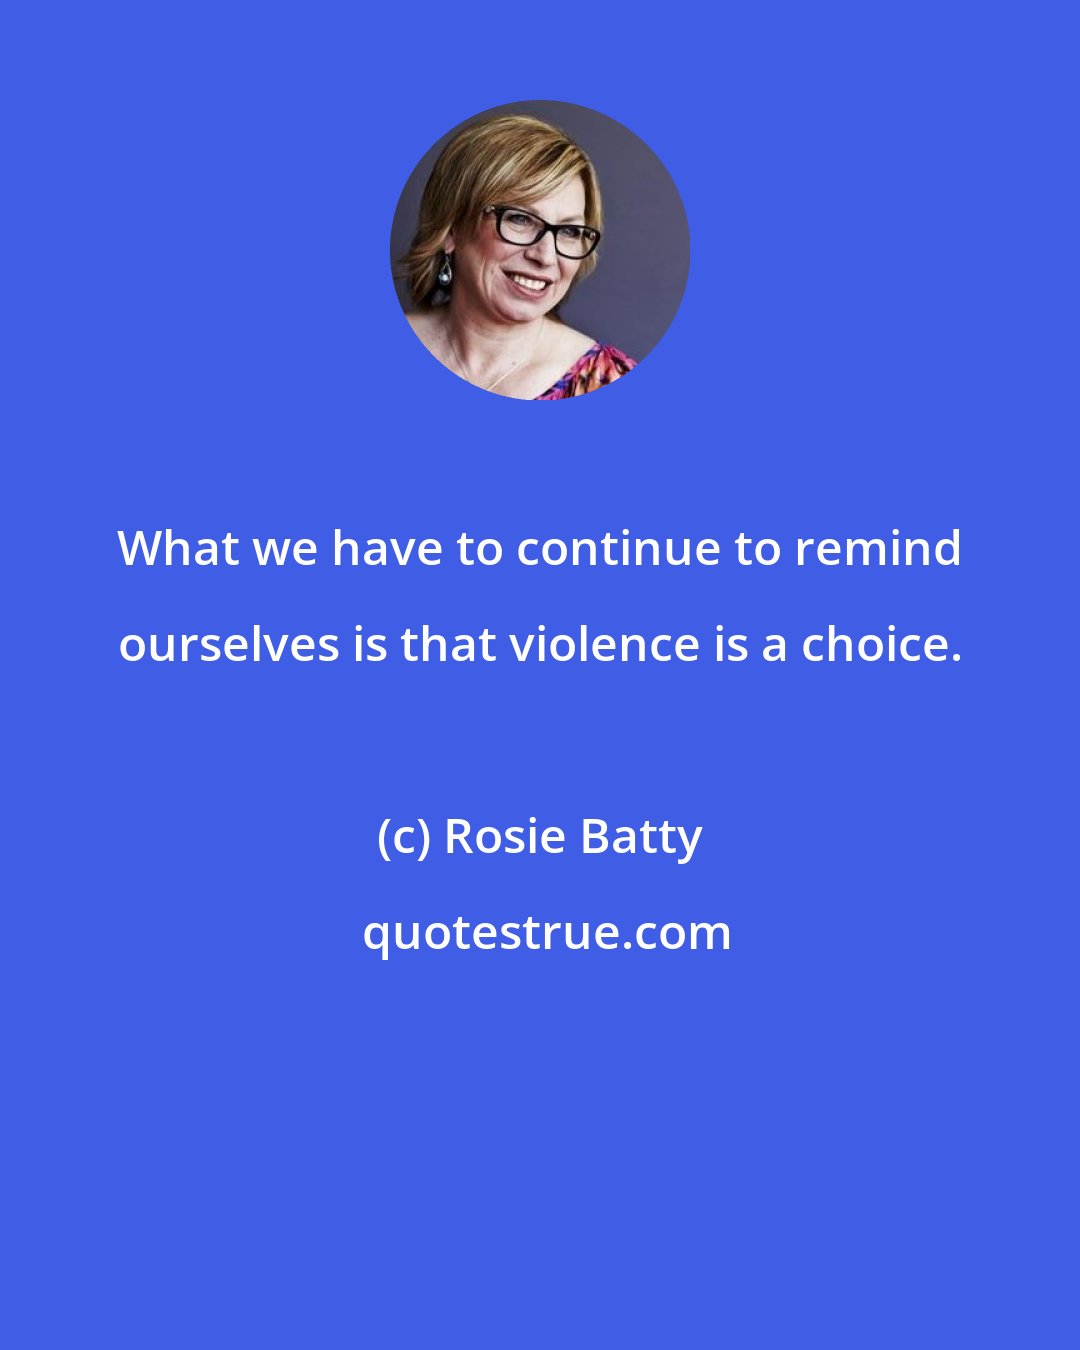 Rosie Batty: What we have to continue to remind ourselves is that violence is a choice.